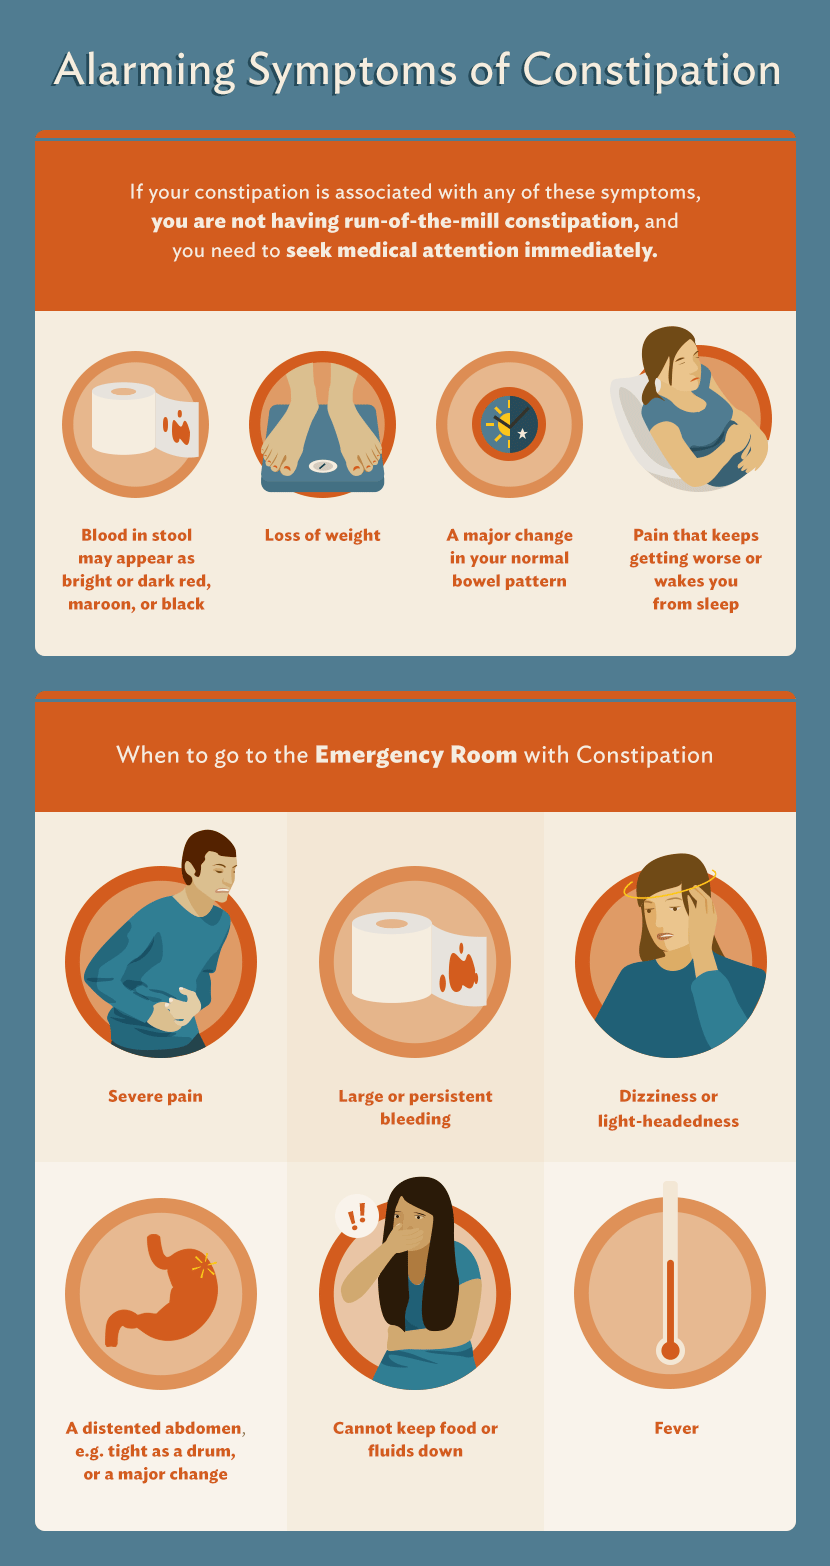 All About Constipation: Signs and Symptoms